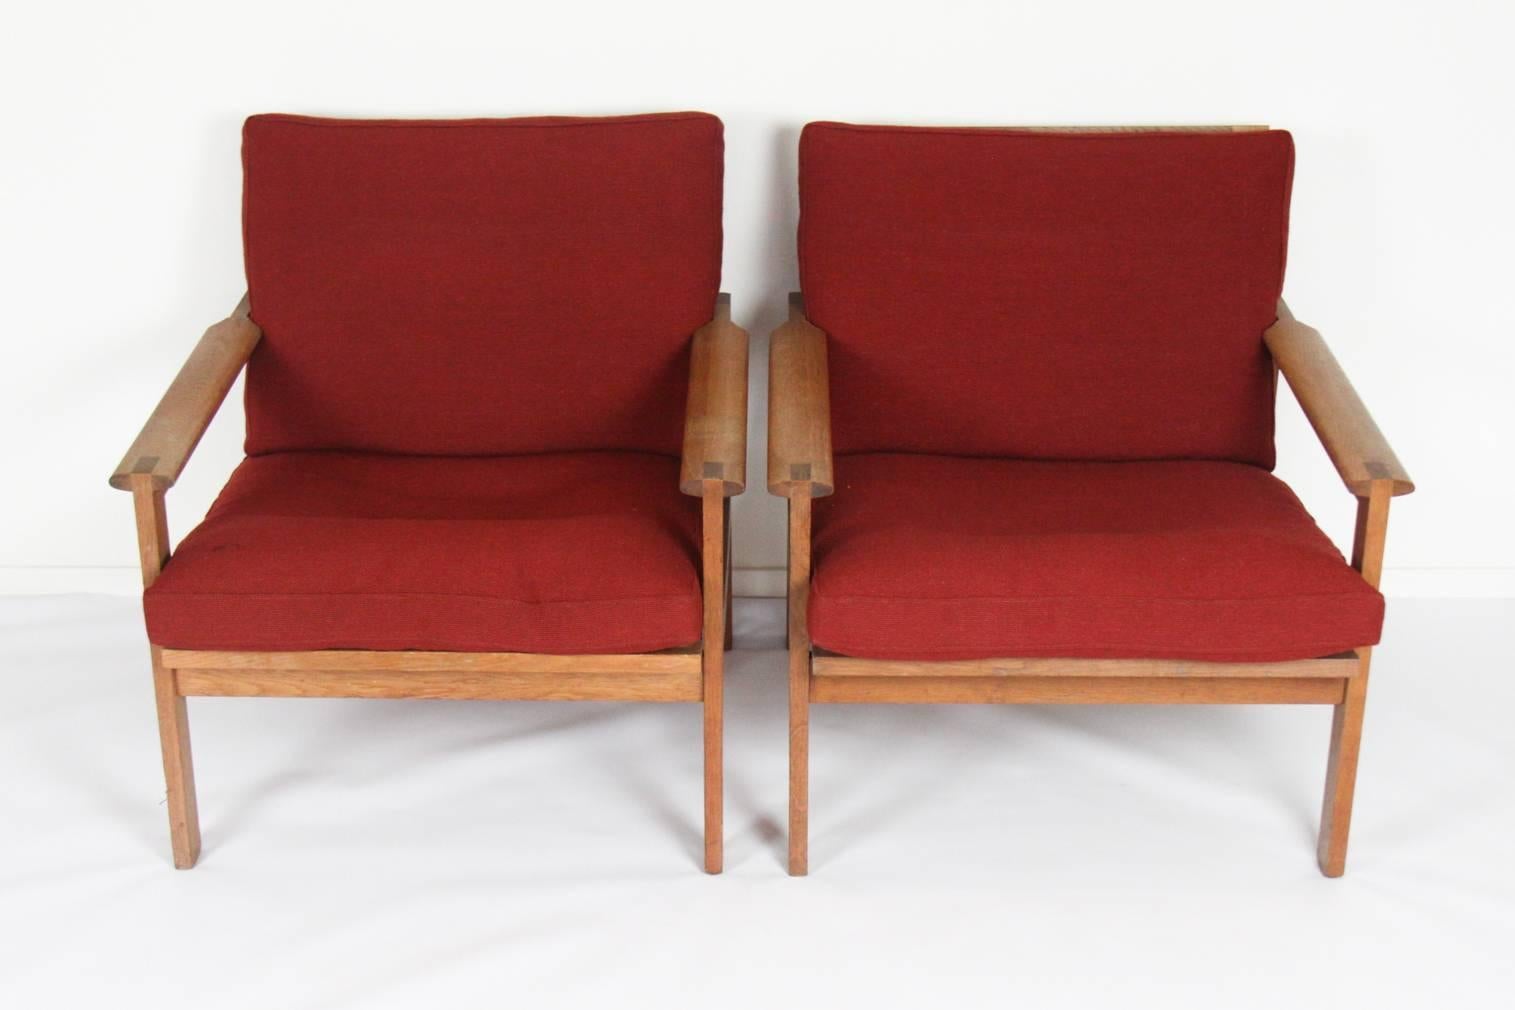 Pair of open-arm teak "Capella" armchairs by Illum Wikkelsø. Produced by Niels Eilersen, Denmark, 1959. The 'Capella' or Model 4 a beautifully simple armchair with some lovely touches. The Classic paddle arms with that lovely jointing so